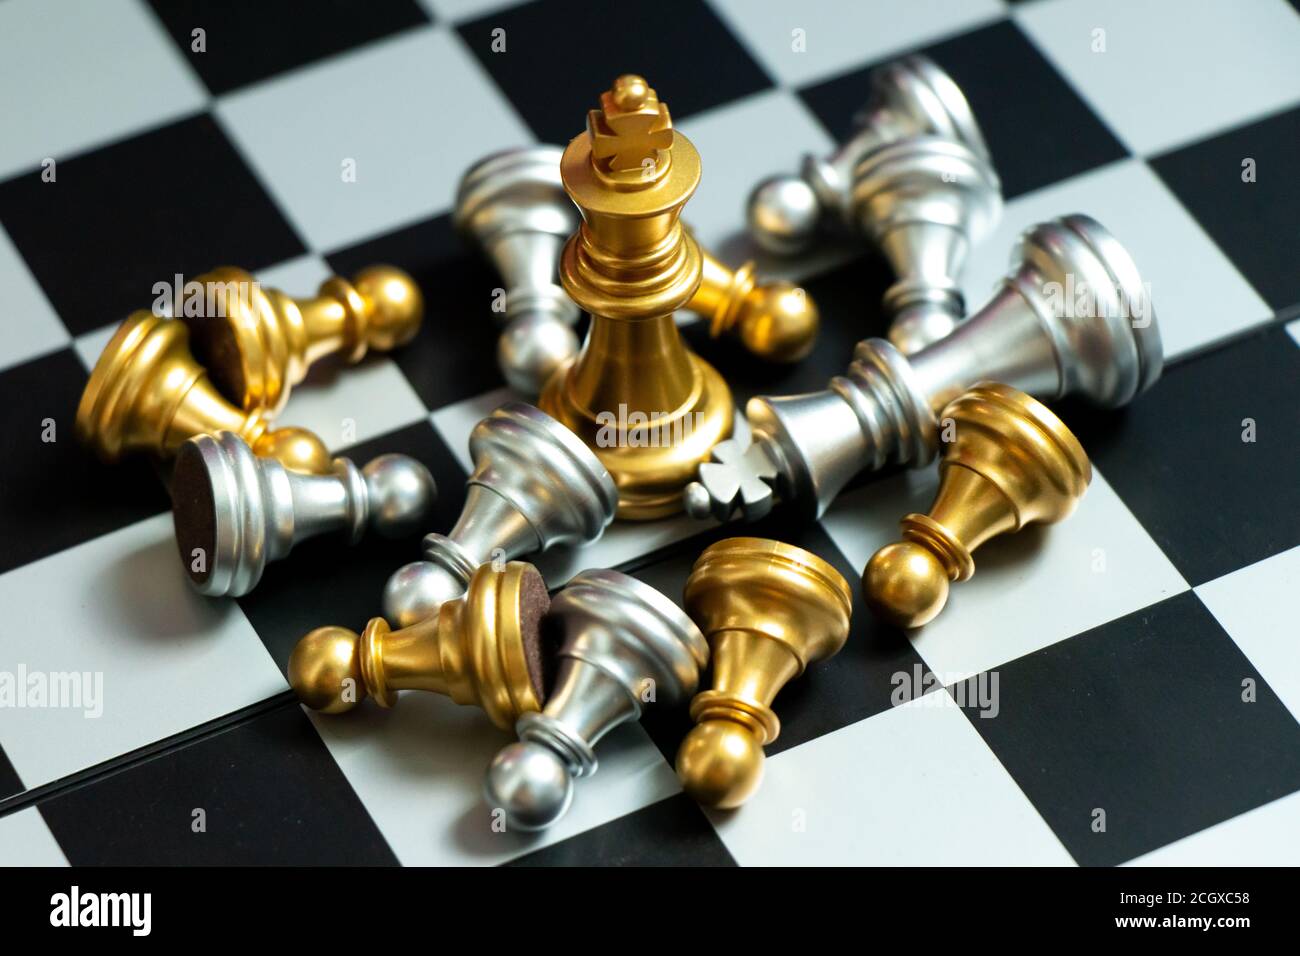 Gold king chess piece win over lying down another piece on black background Stock Photo